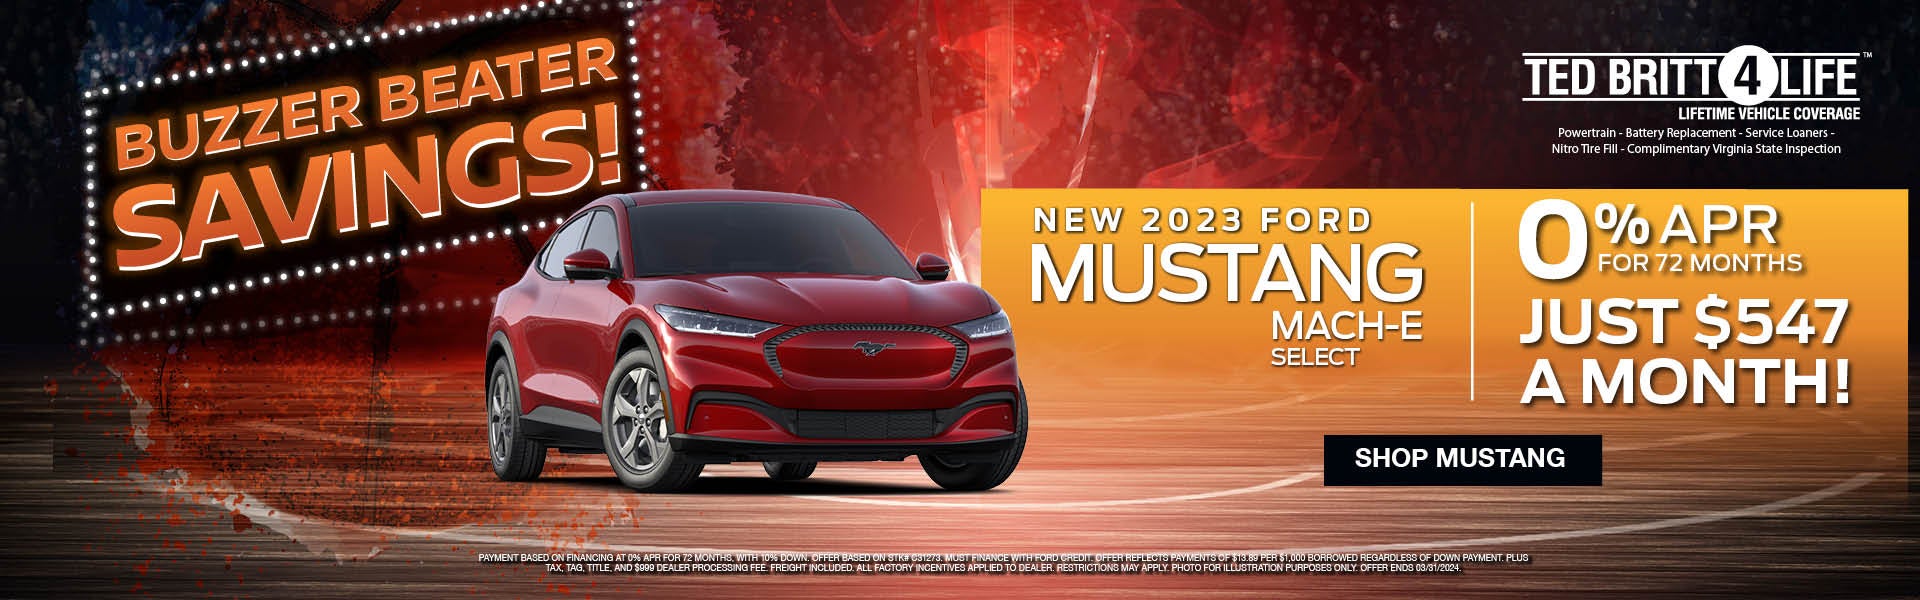 NEW 2023 FORD MUSTANG MACH-E SELECT